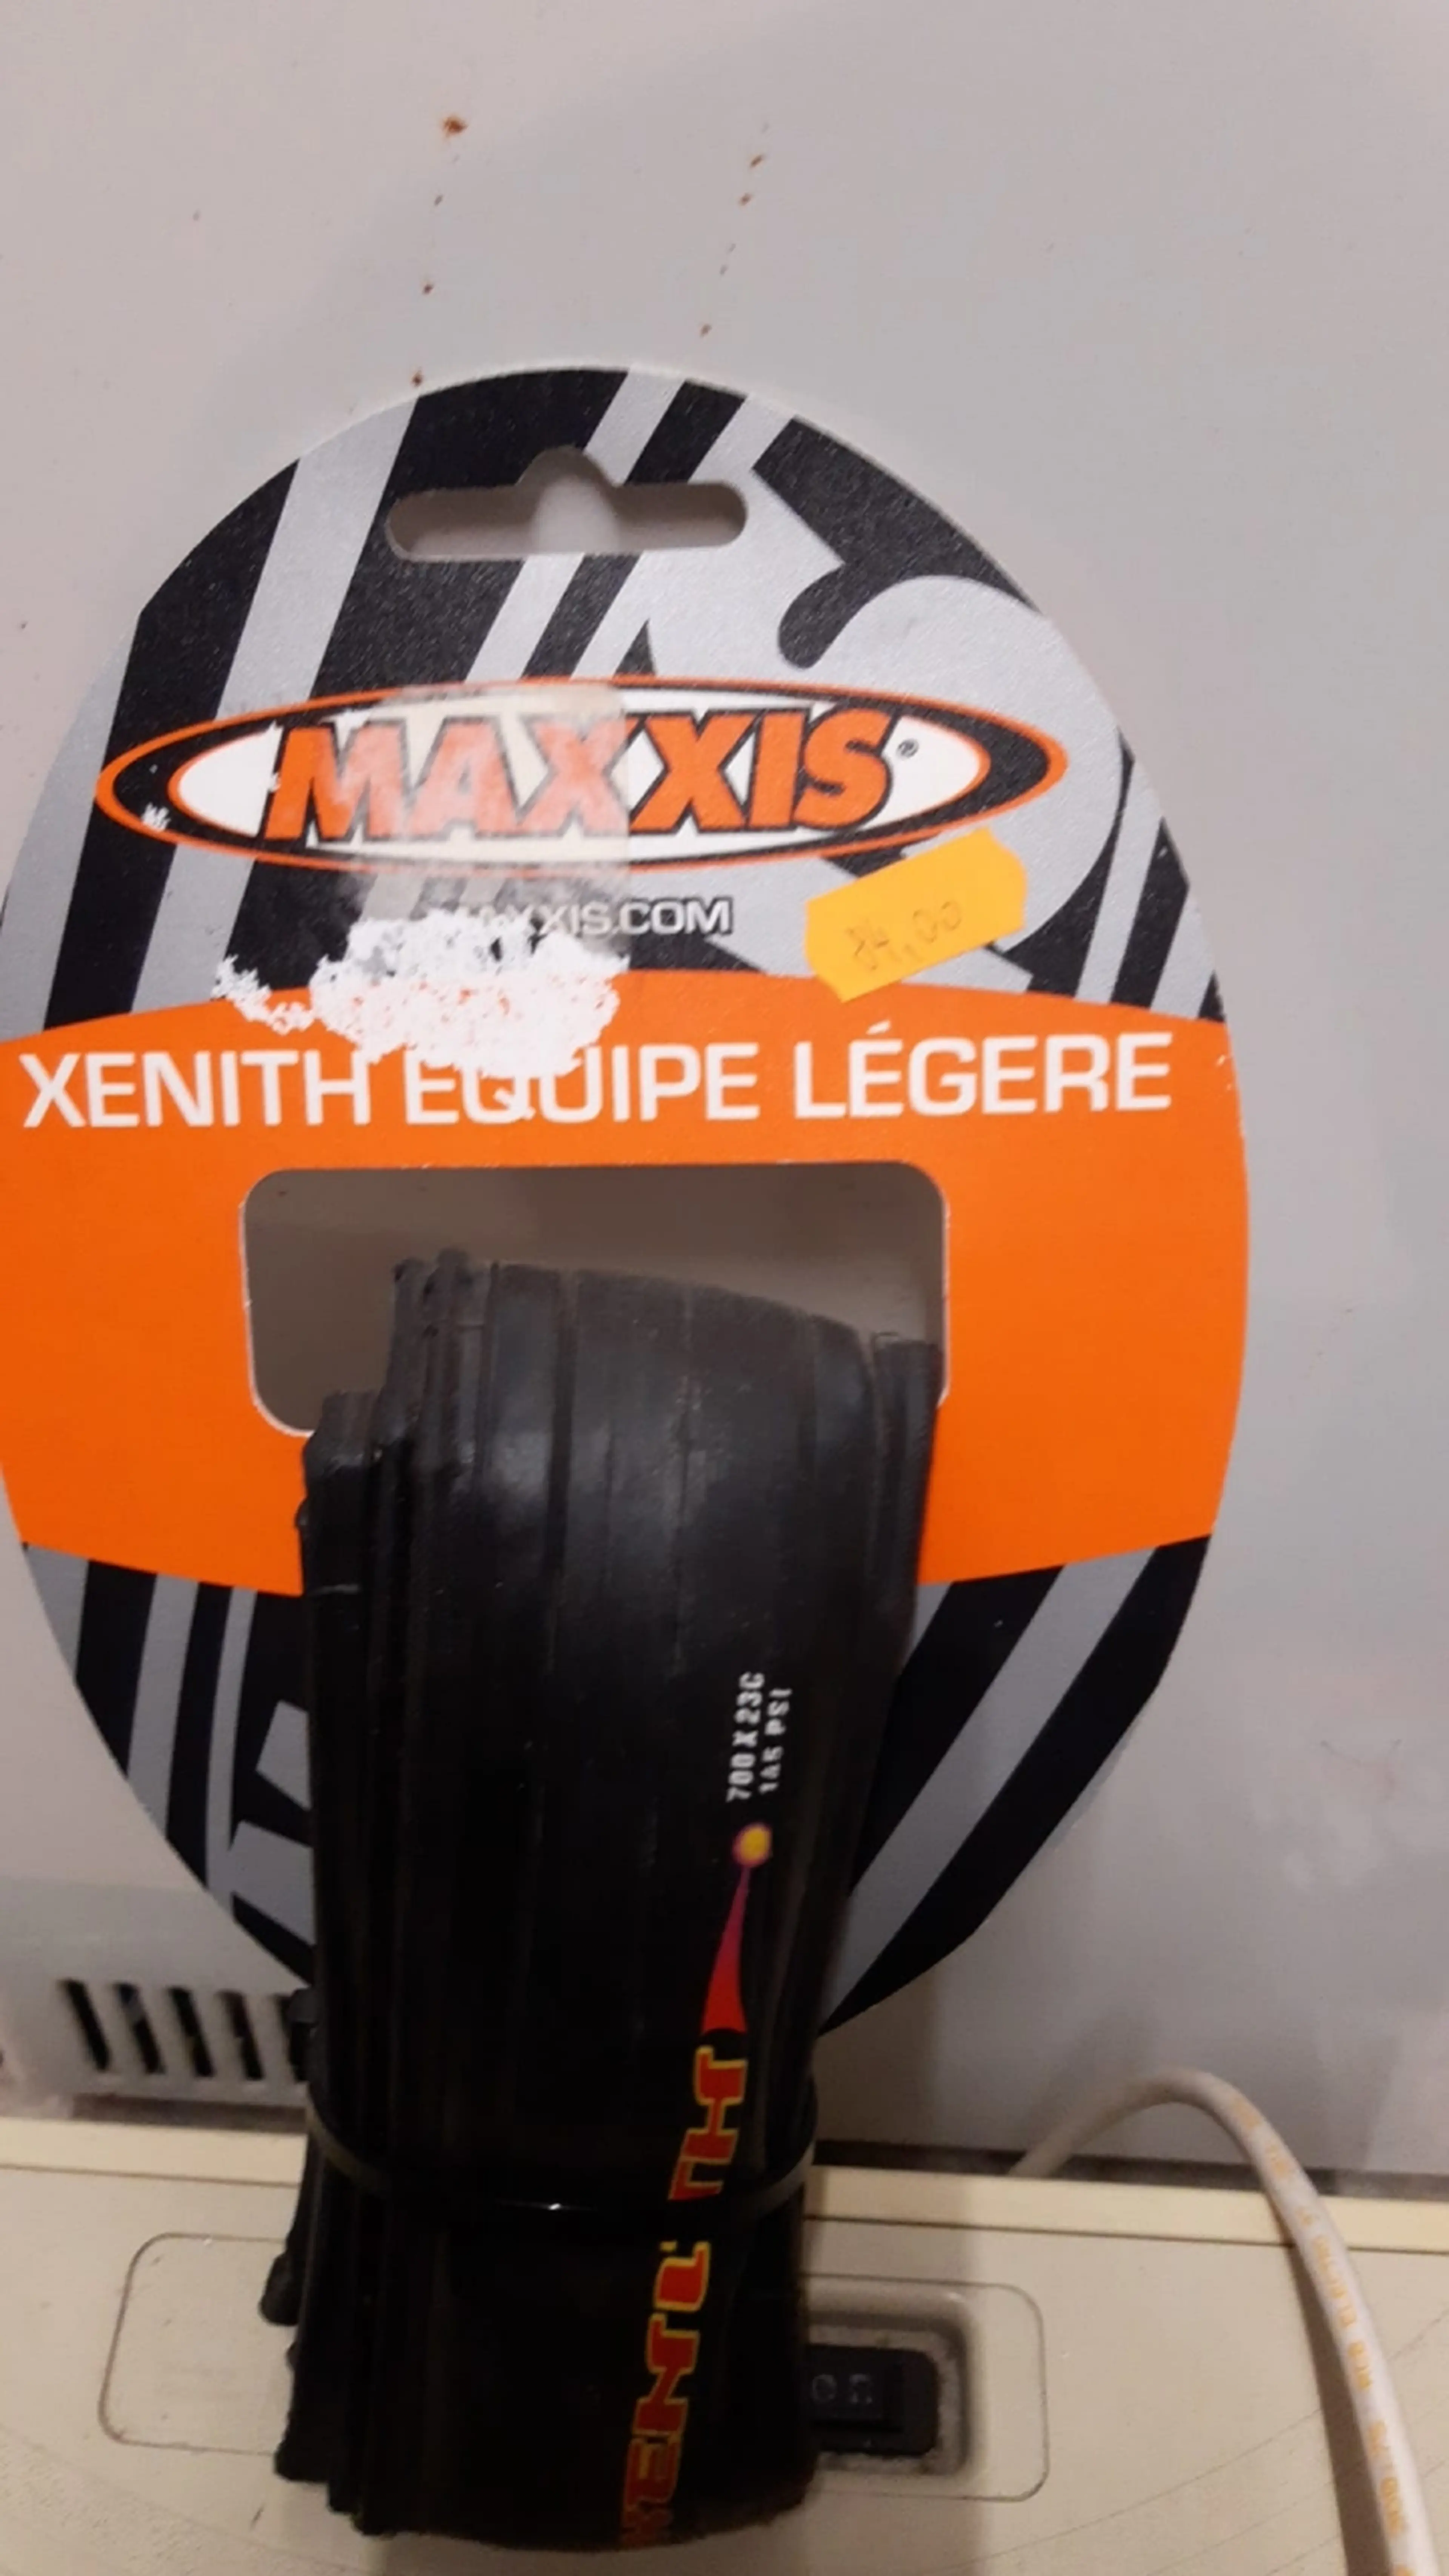 Image Anvelopa Maxxis Xenith Equipe Legere Foldabil 700x23C